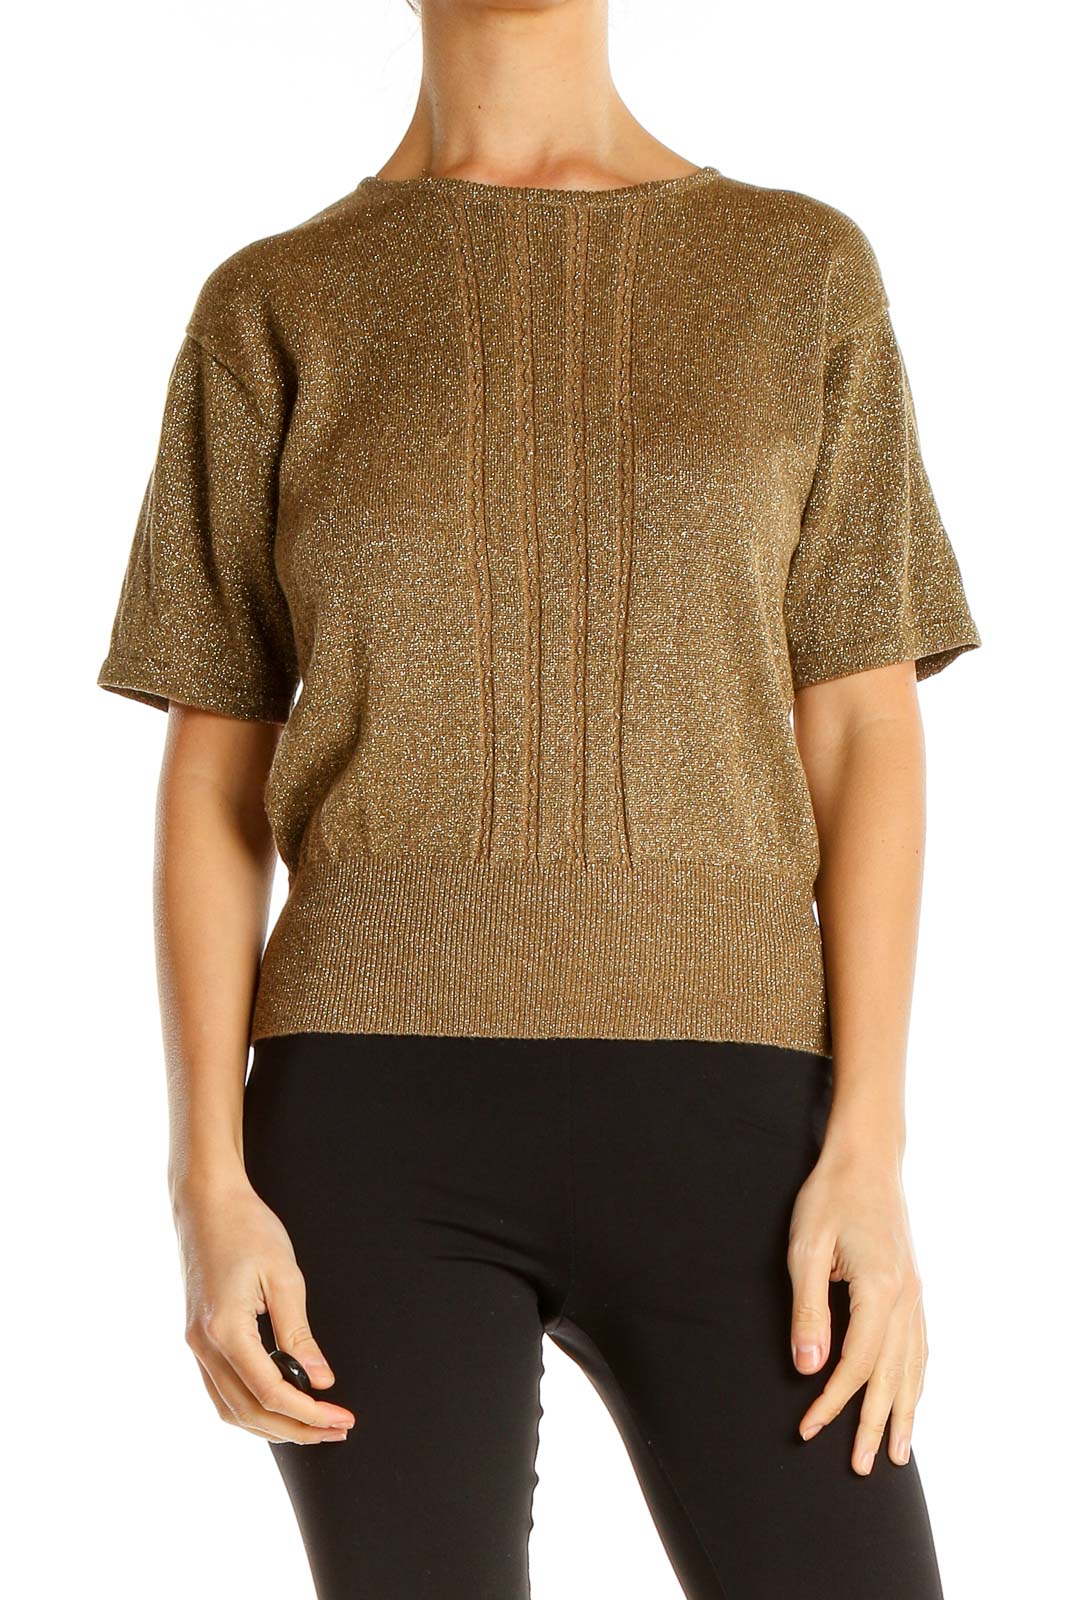 Brown Shimmer Woven Retro Top Front